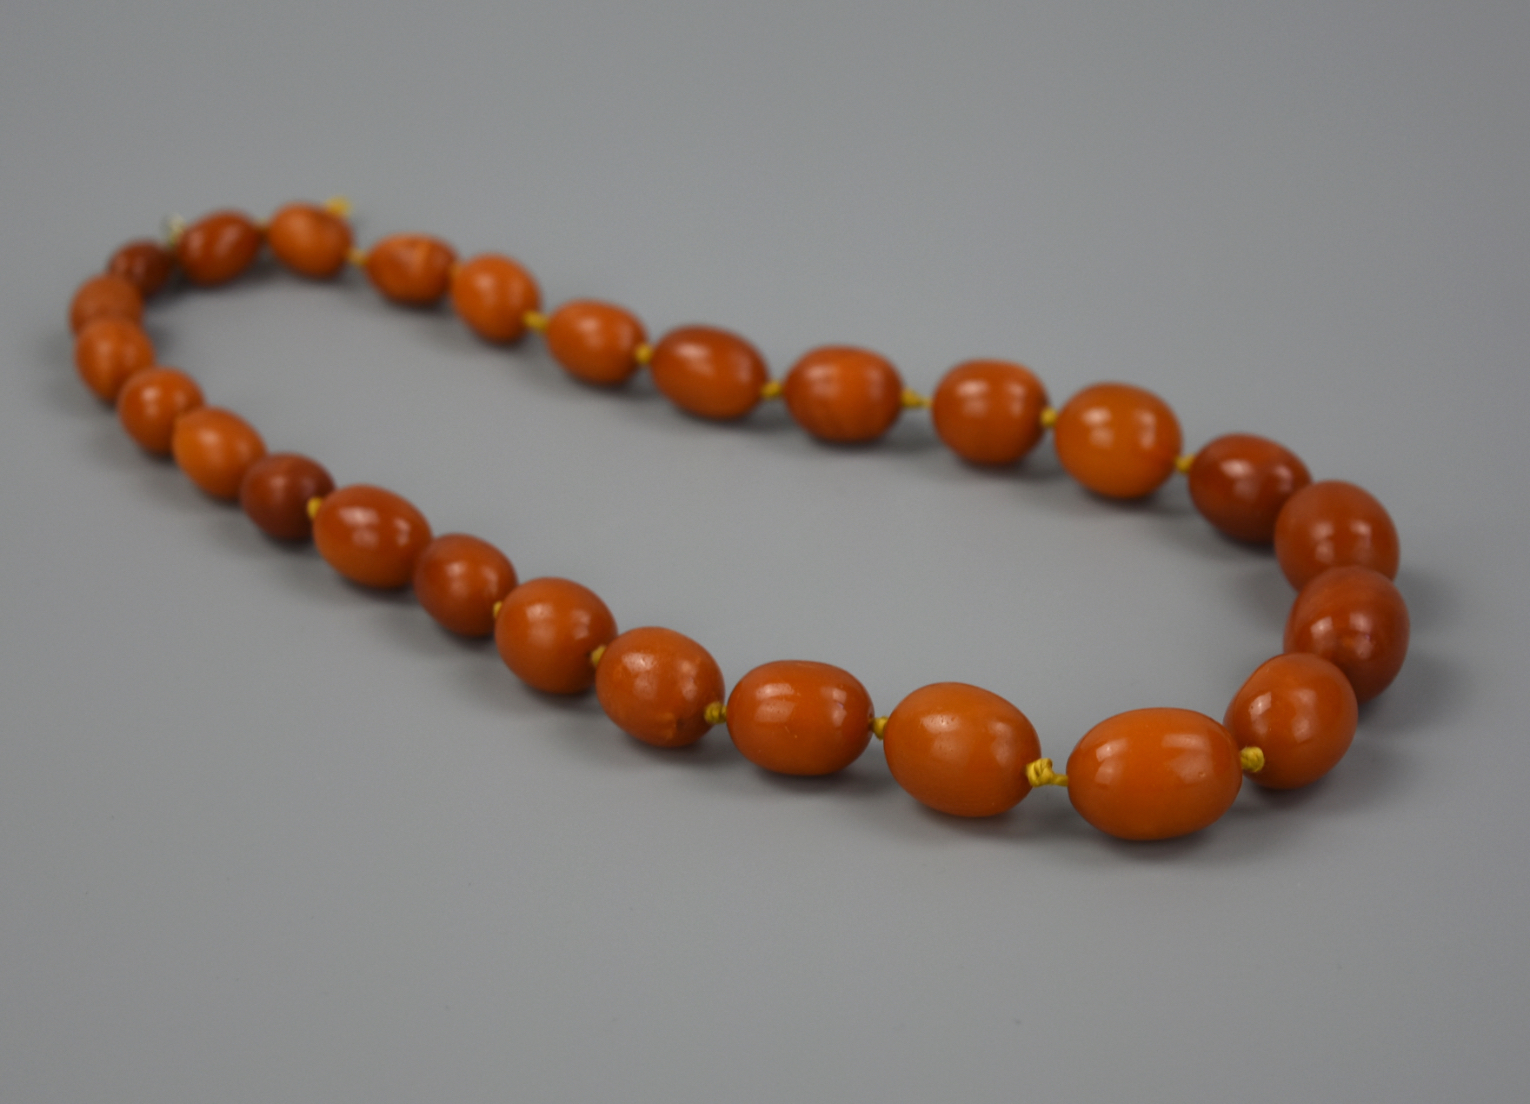 A CHINESE 27 BEED BEESWAX NECKLACE 2cf5dd